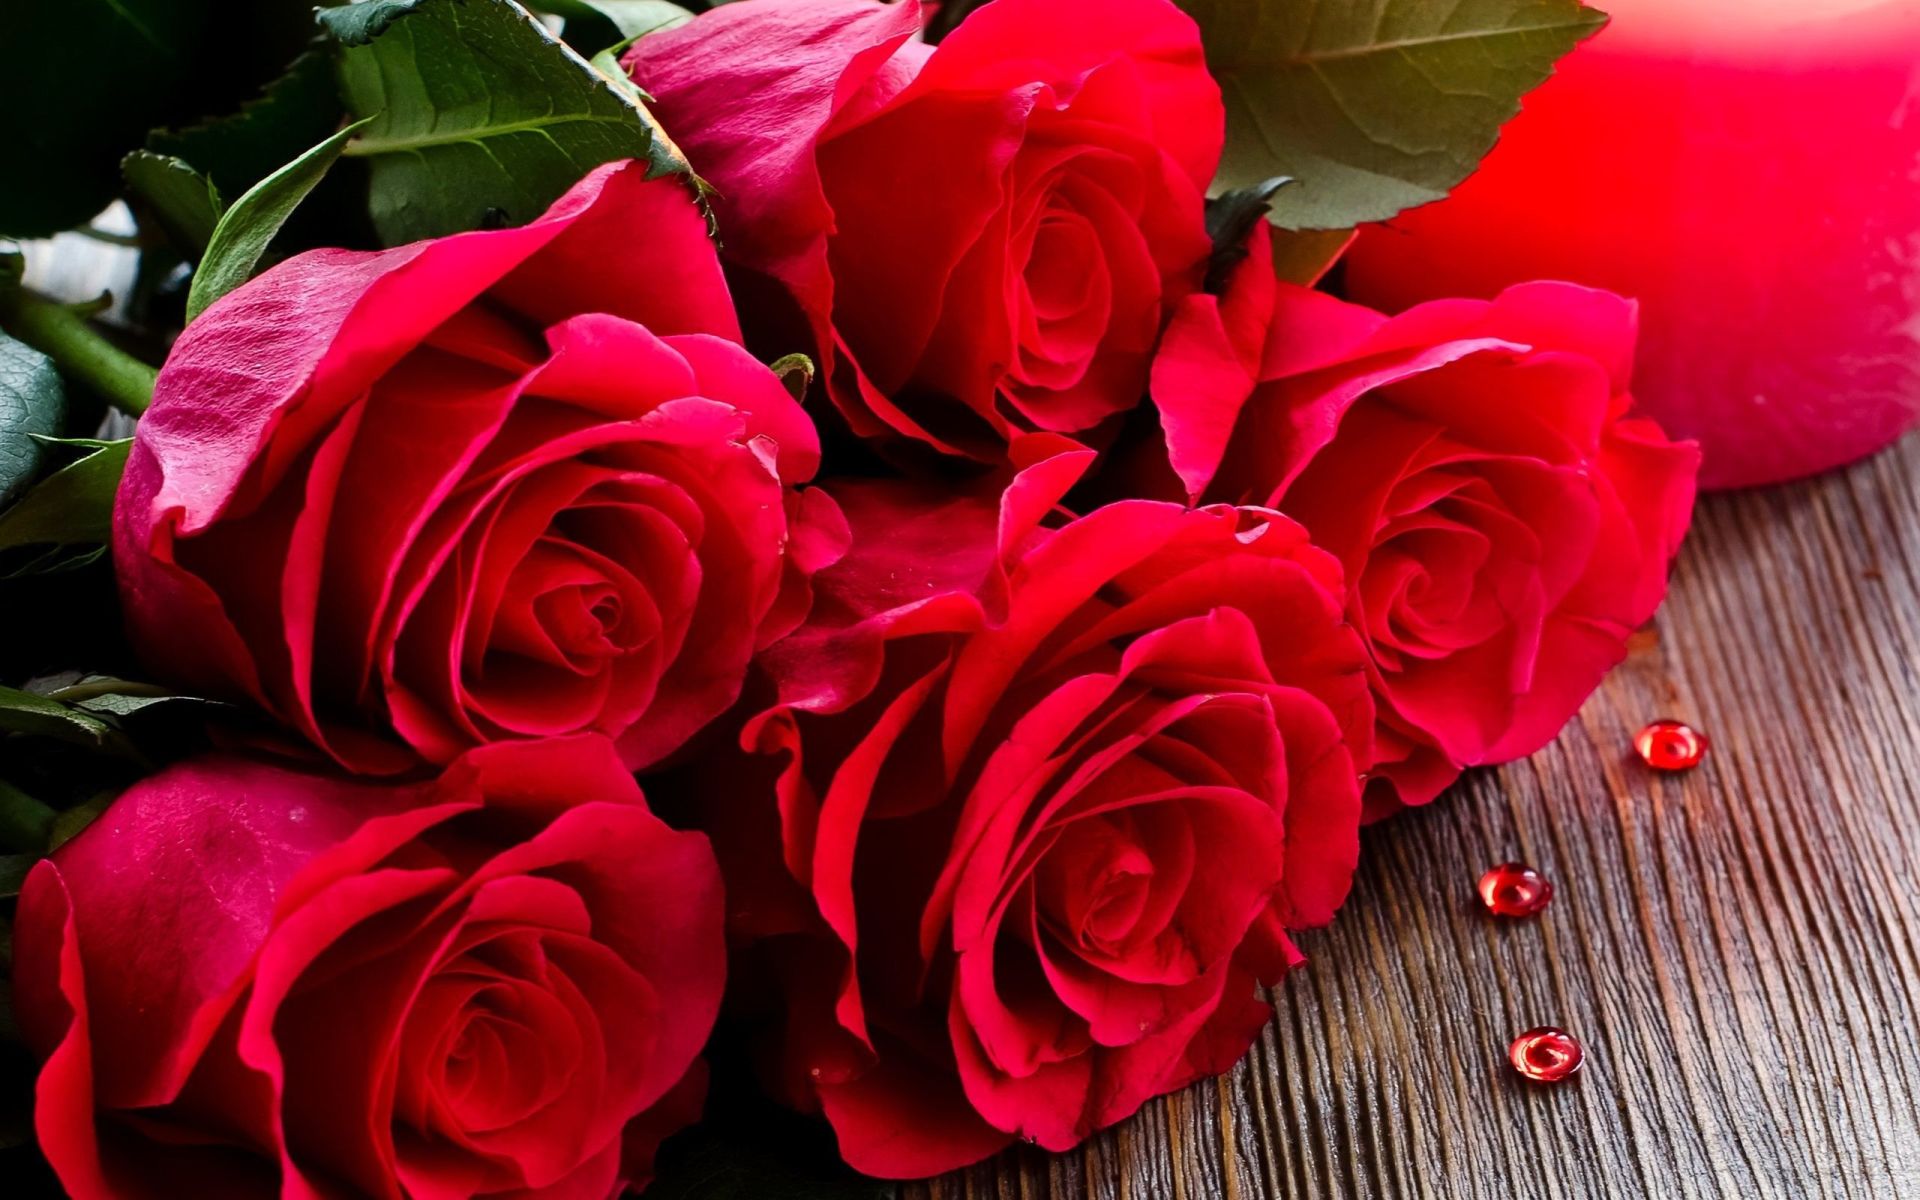 bouquet of red roses on a wooden surface